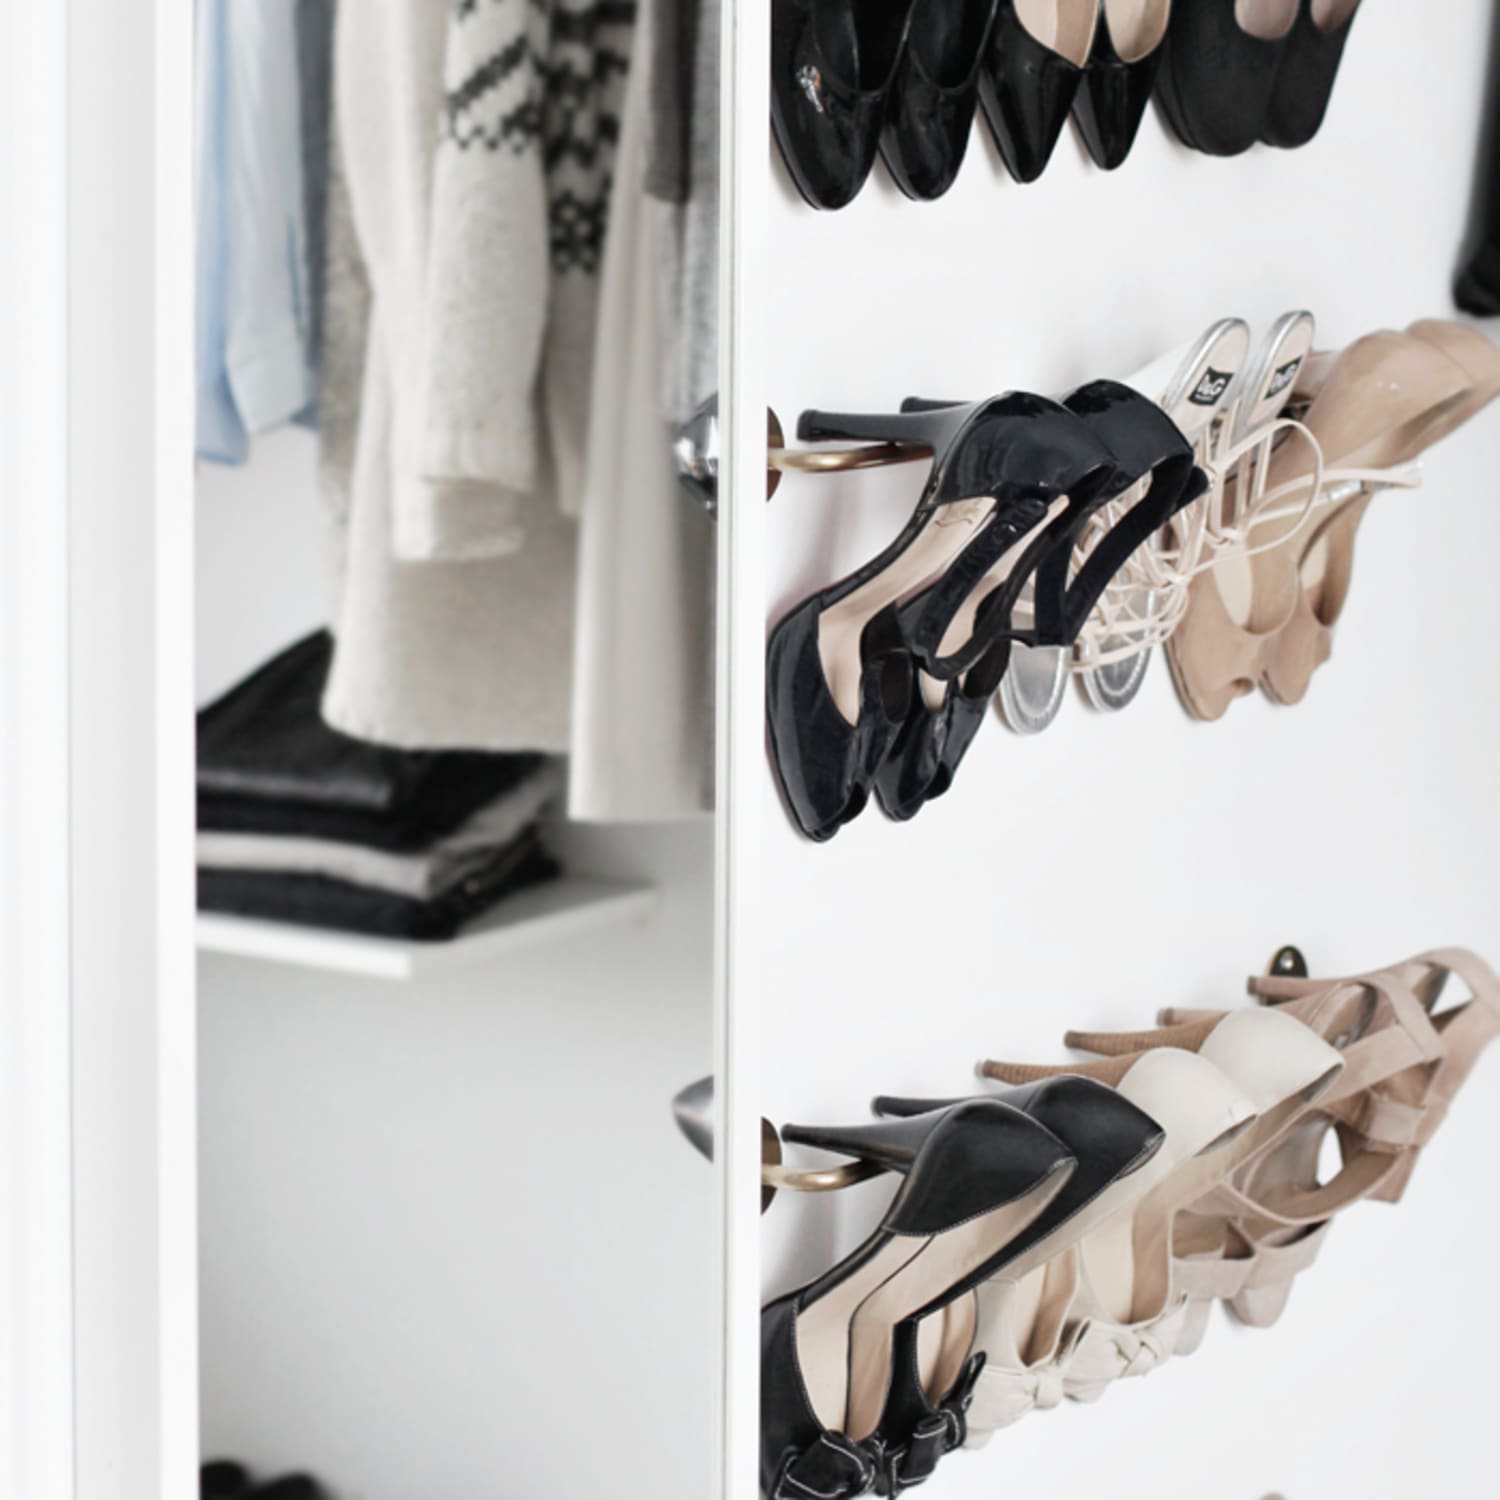 IKEA Shoe Storage Products & Solutions